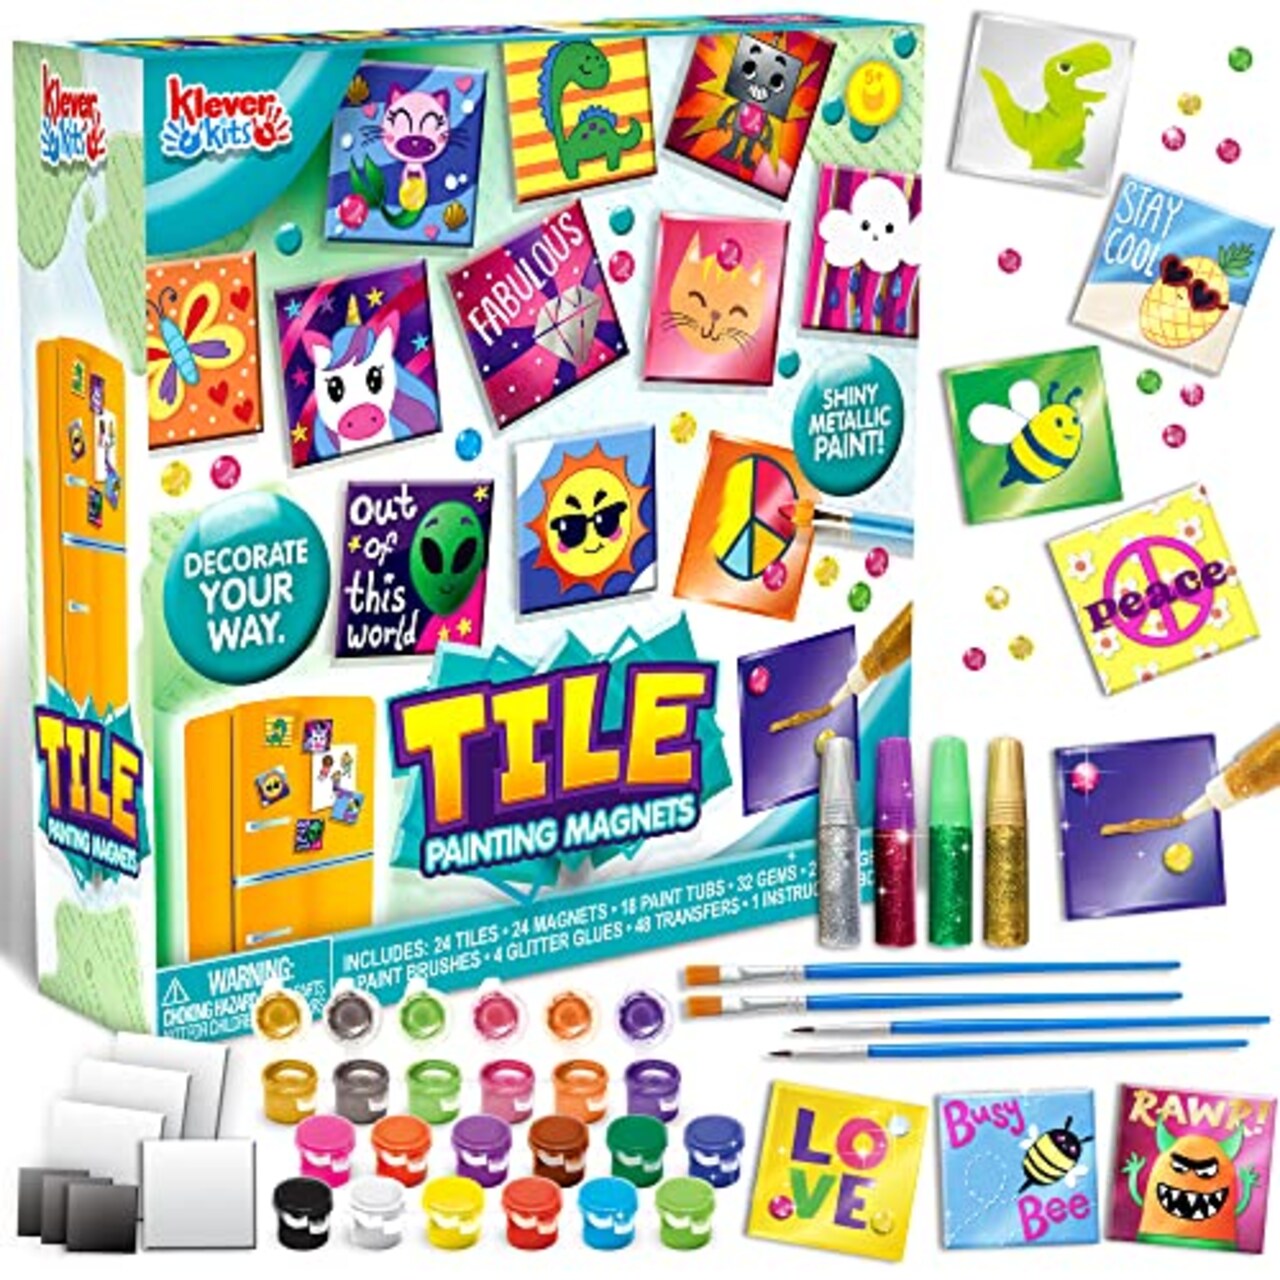 JOYIN 24 Magnetic Mini Tiles Art Kit, Creativity DIY Paint, Arts and Crafts  for Kids, DIY Supplies for Party Favors, Family Activity, Birthday Present,  Toys Gifts for Boys and Girls Ages 4-12